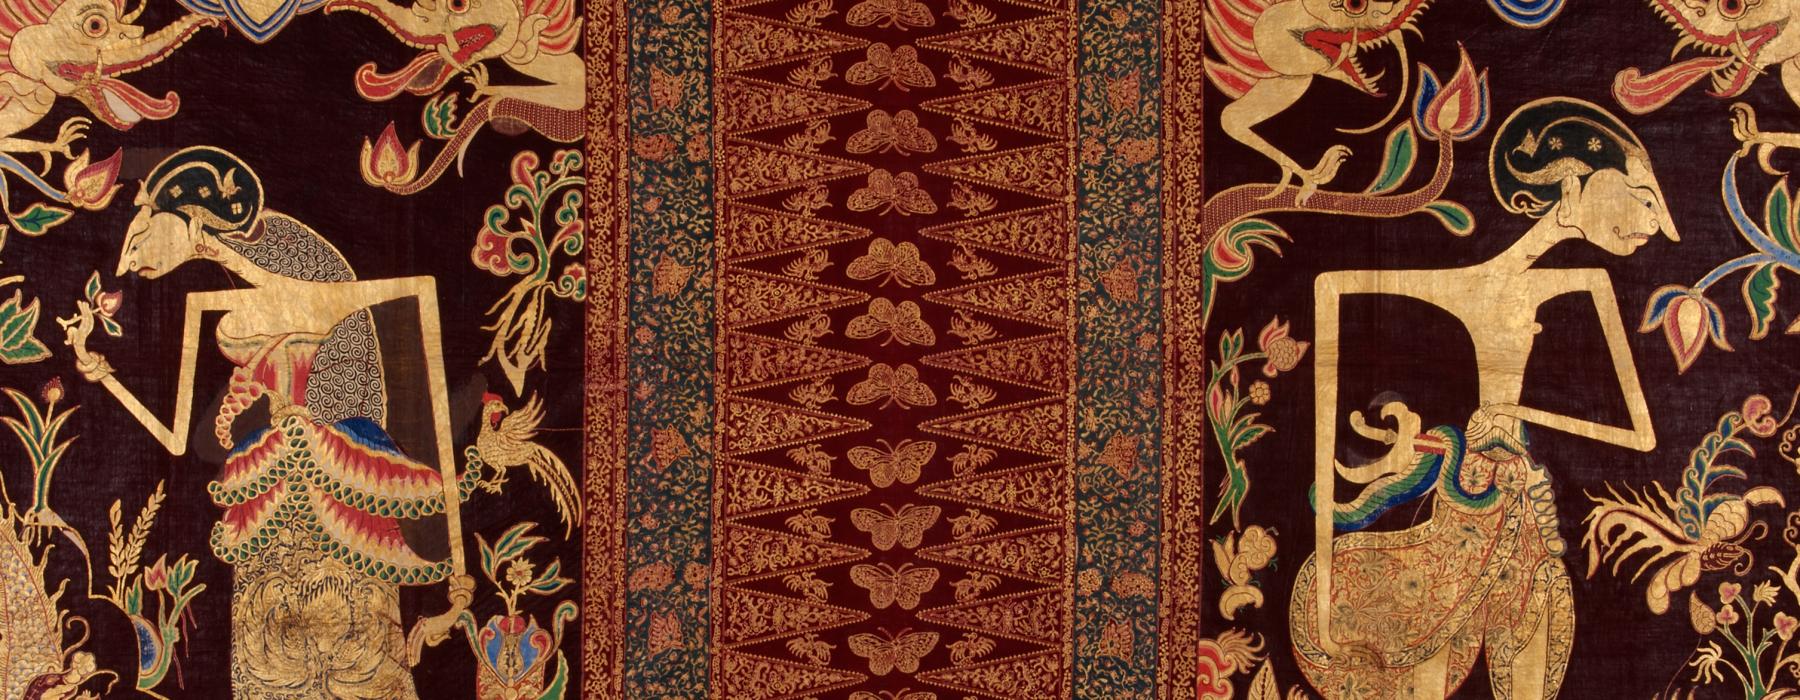 Indonesian Textiles at the Tropenmuseum - Research Center for Material Culture